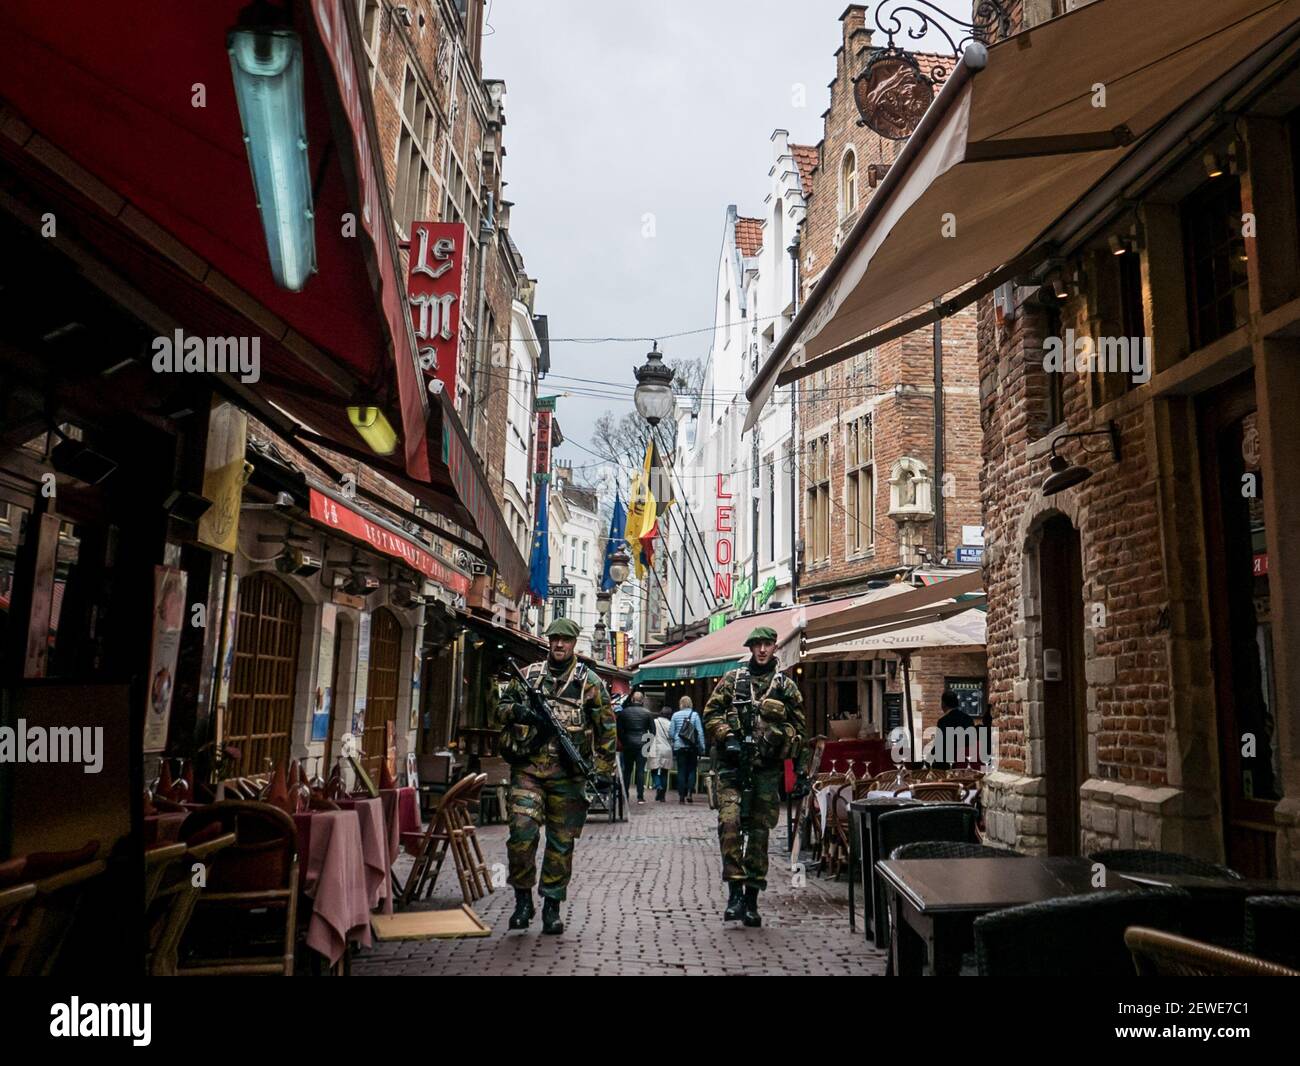 Military forces patrolling in the touristic area in Brussels, Belgium, on April 25 2016.  A month ago, a terrorist attack killed 16 people and wounded many more in the Belgium capital. (Photo by Aurore Belot) *** Please Use Credit from Credit Field *** Stock Photo